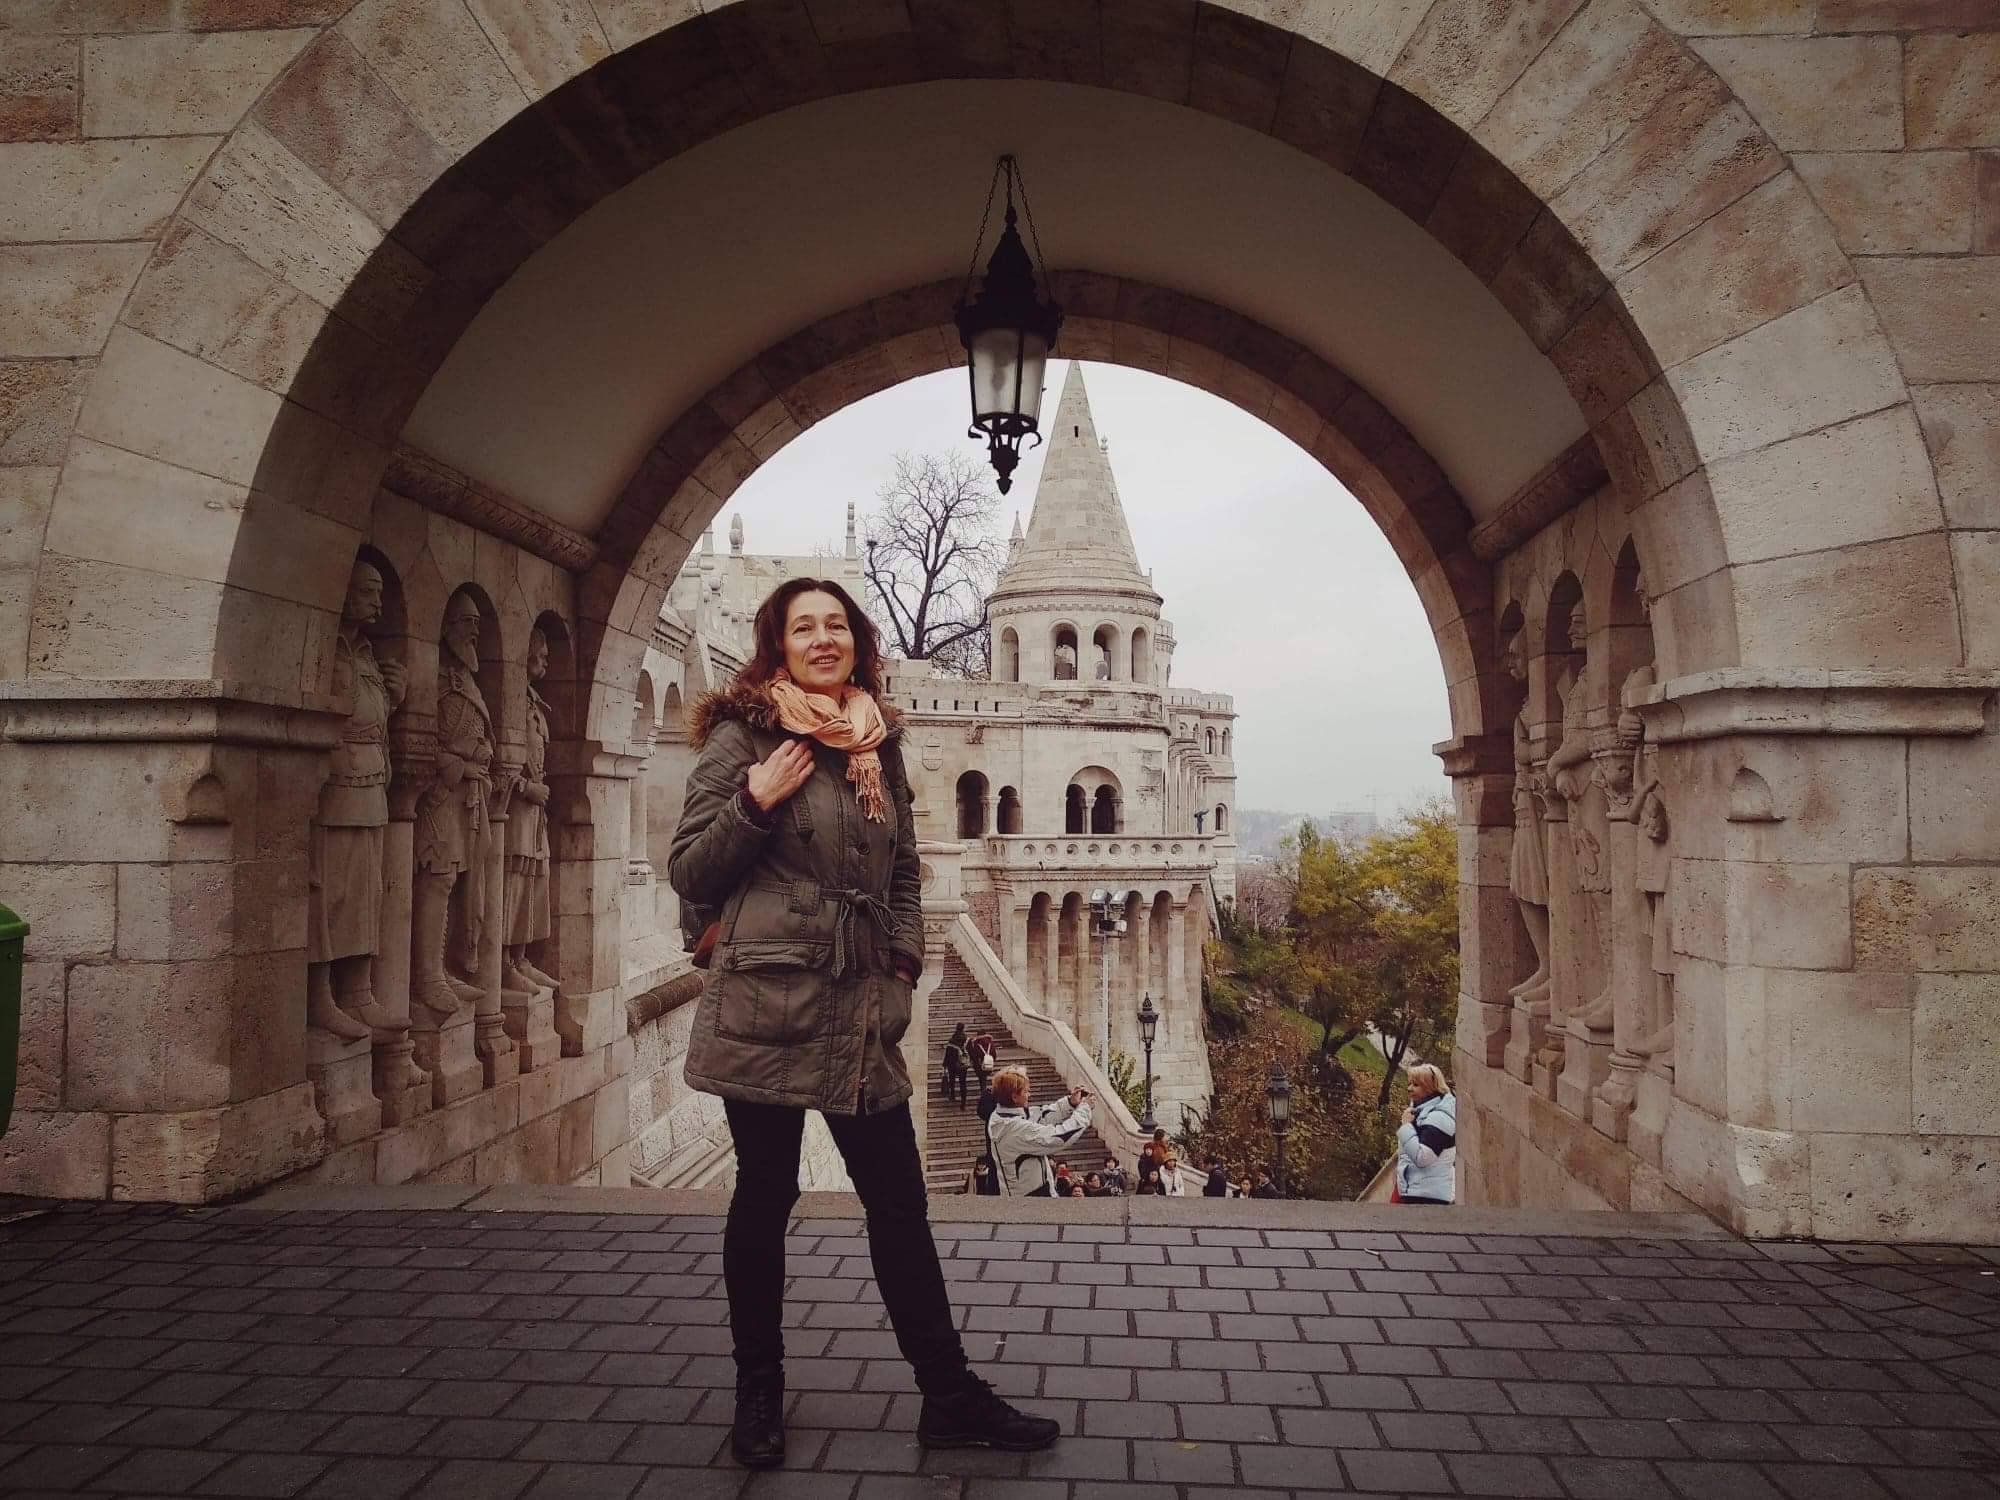 It was one of the most beautiful places I visited in Budapest!